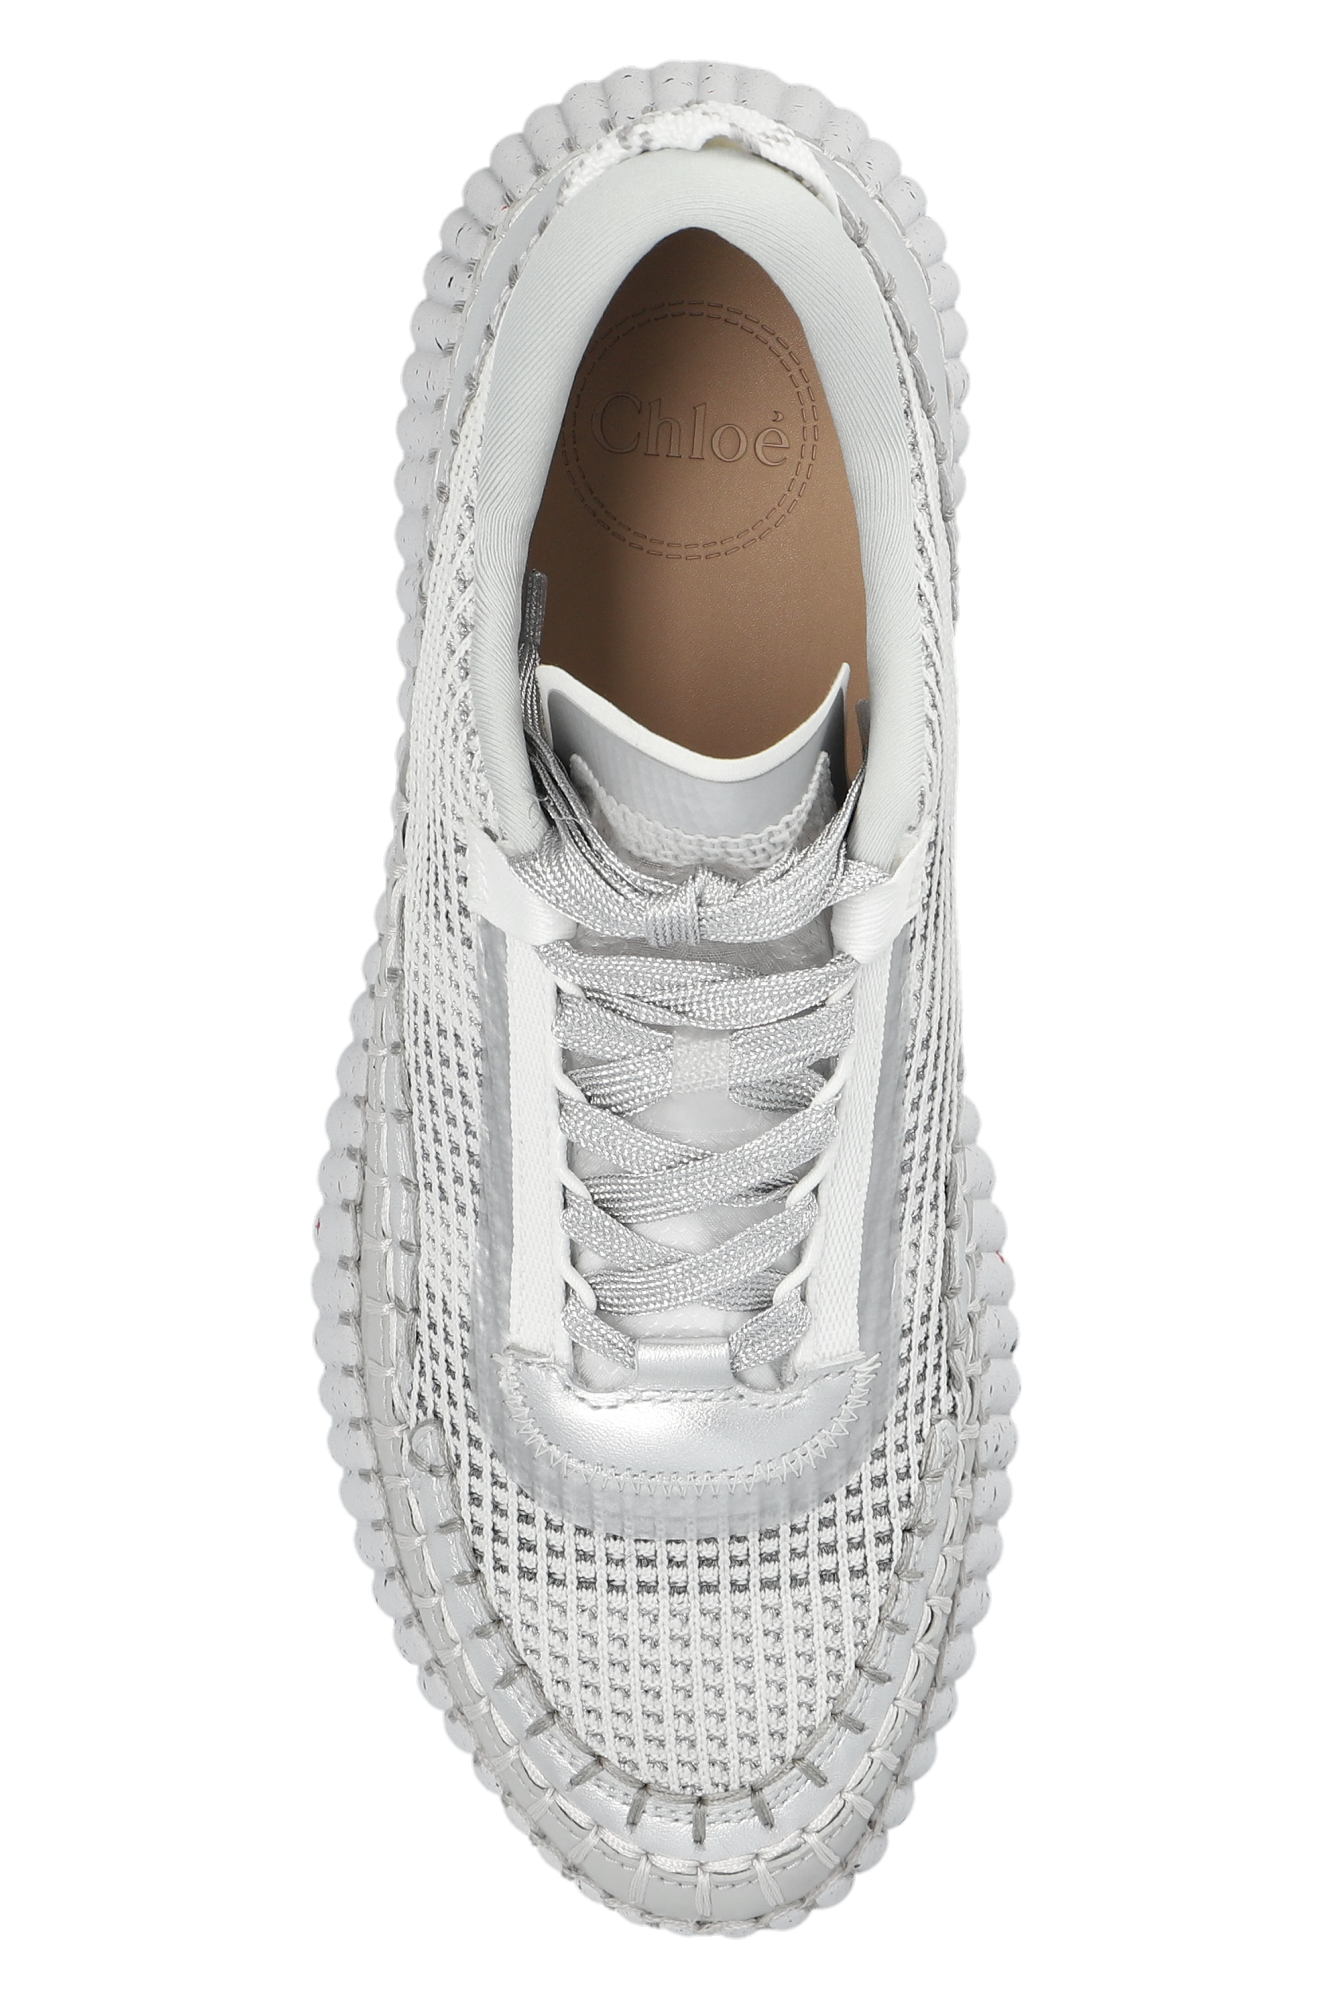 Chloé ‘Nama’ lace-up sneakers